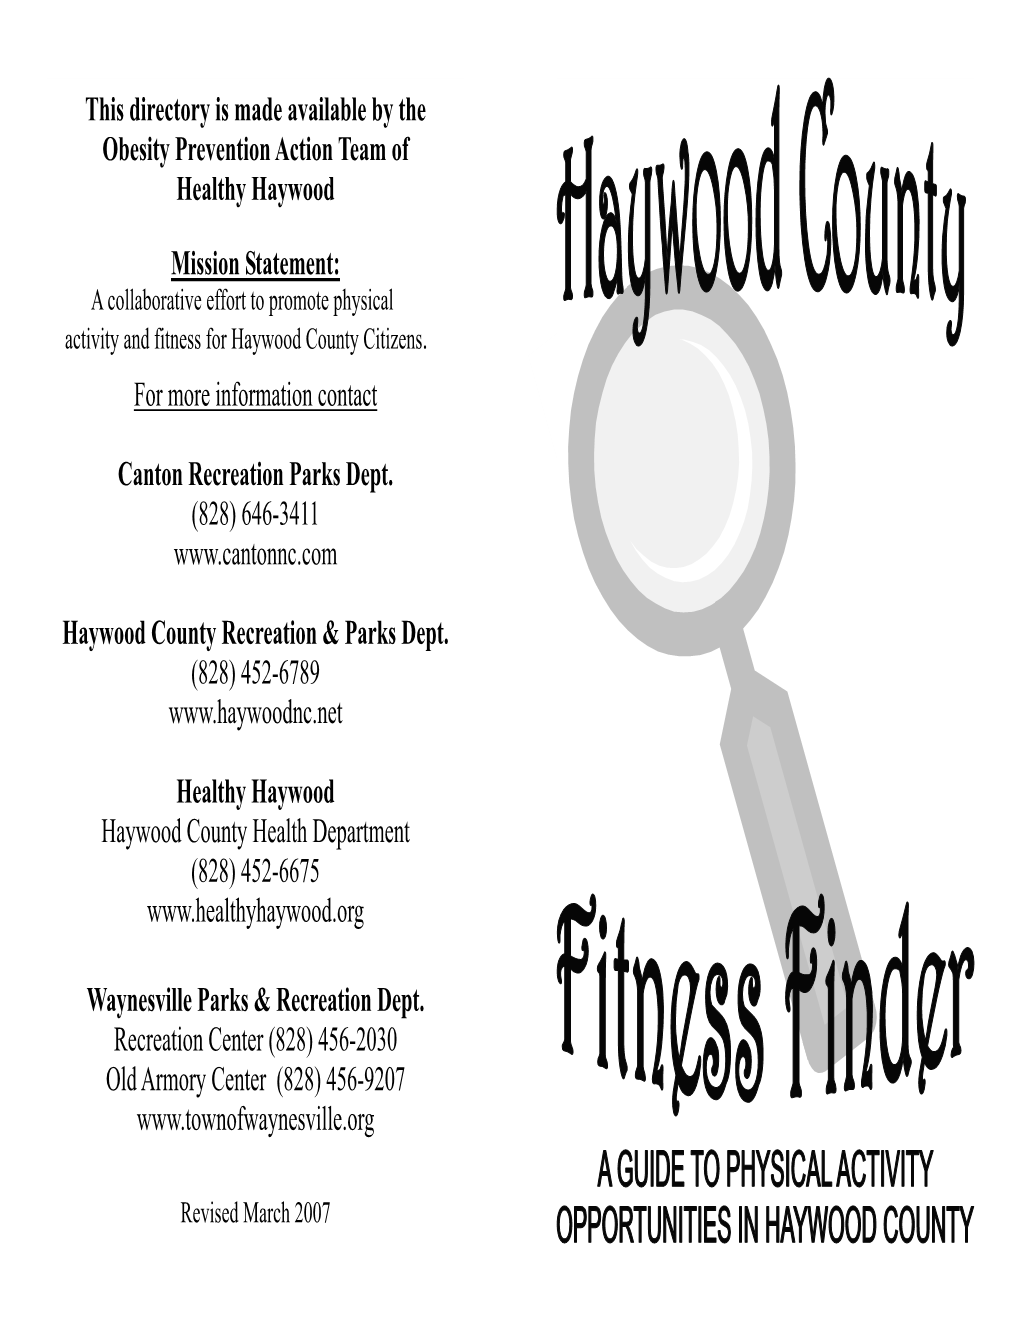 This Directory Is Made Available by the Obesity Prevention Action Team of Healthy Haywood